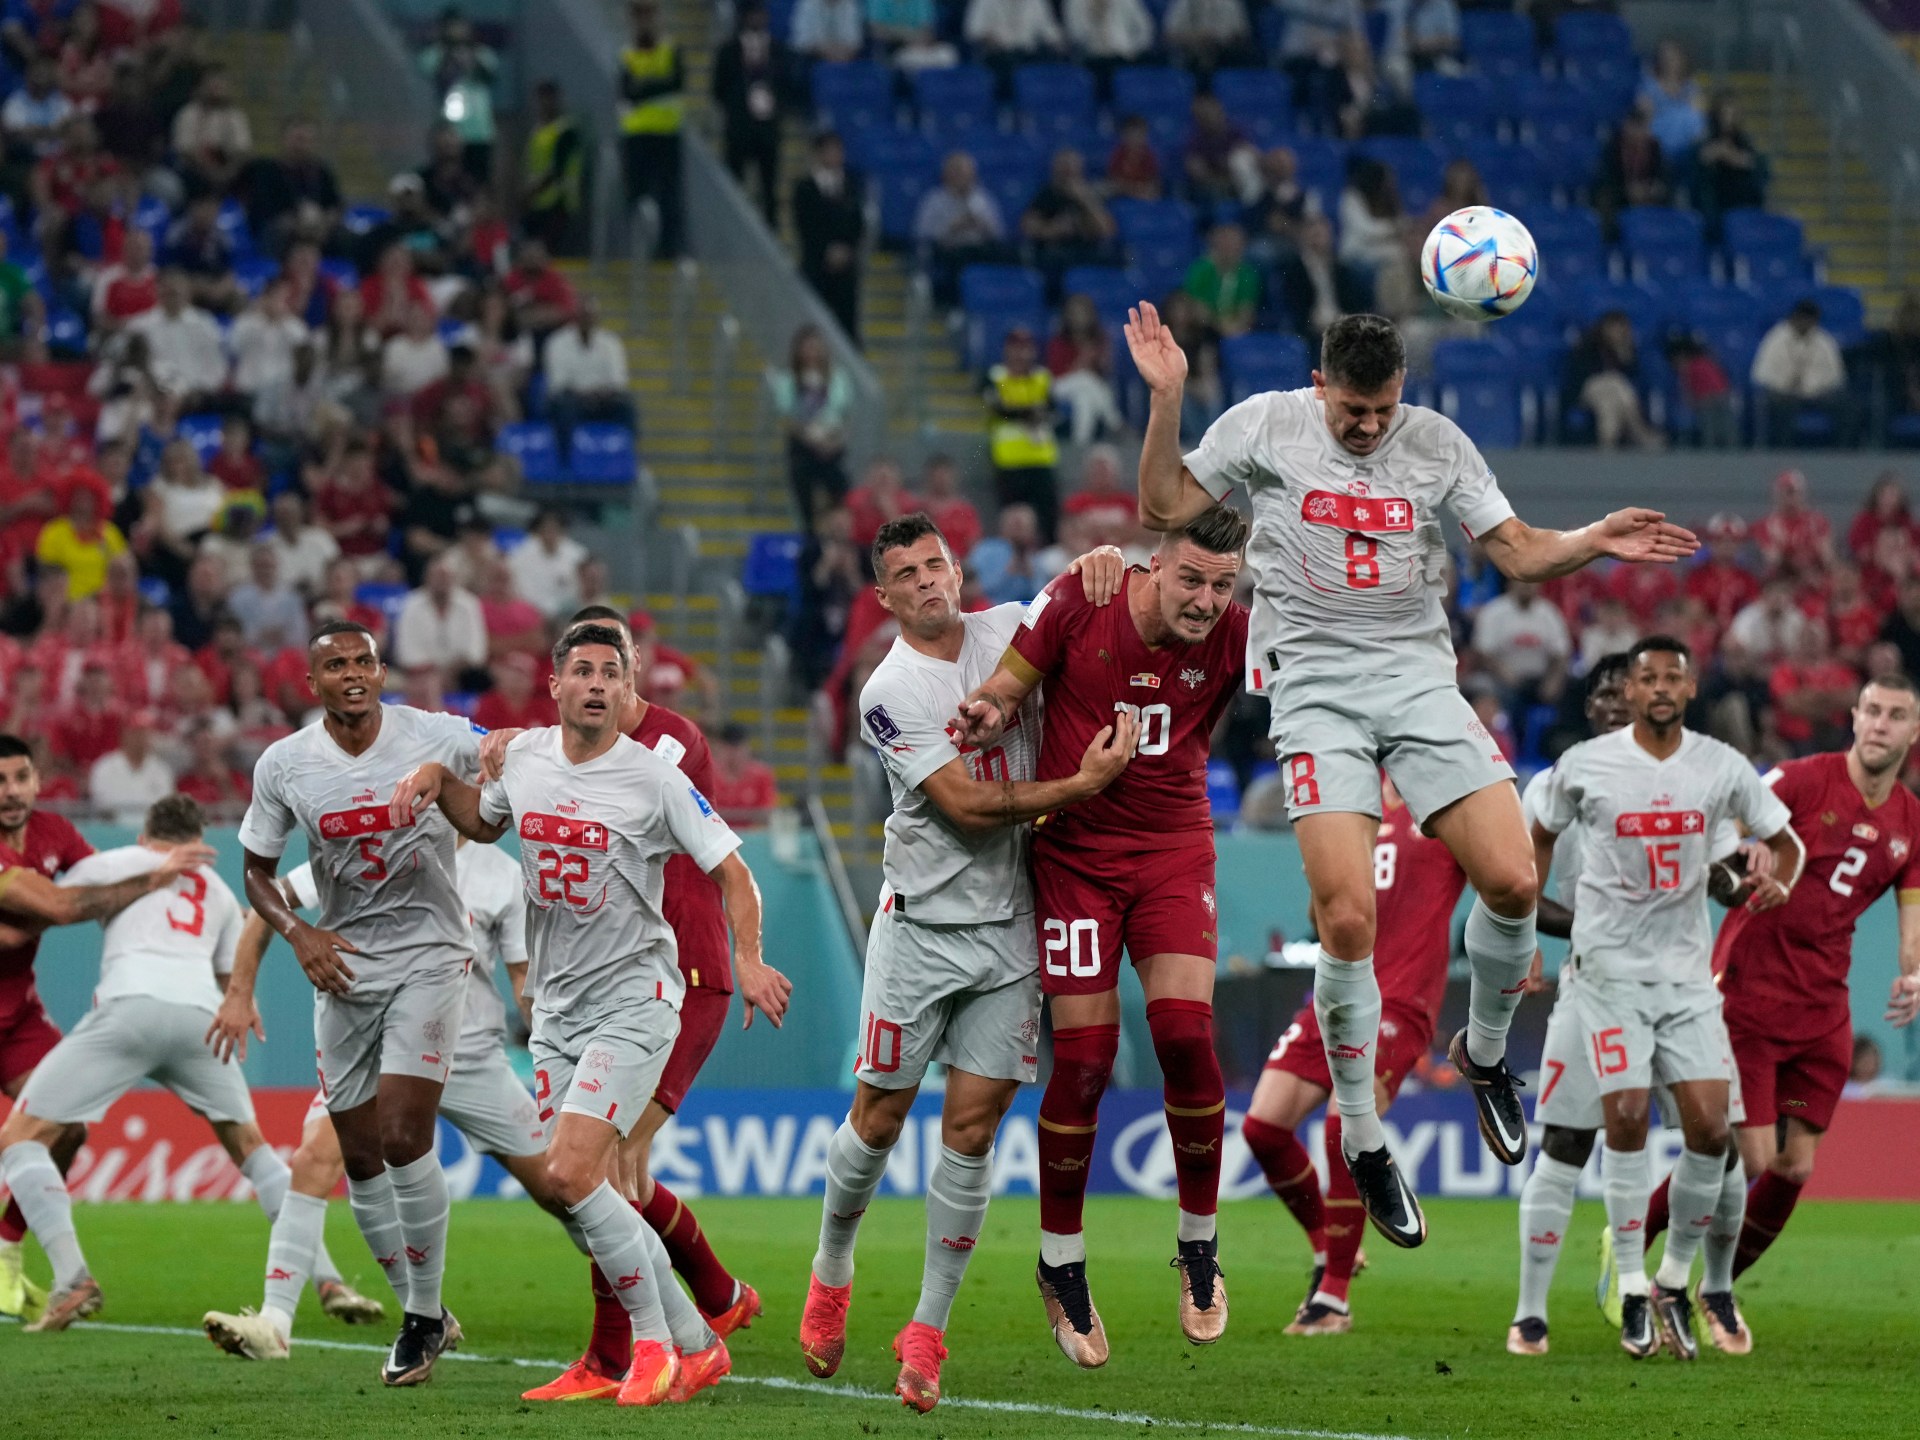 Pictures: Switzerland edge Serbia in goalfest to succeed in final 16